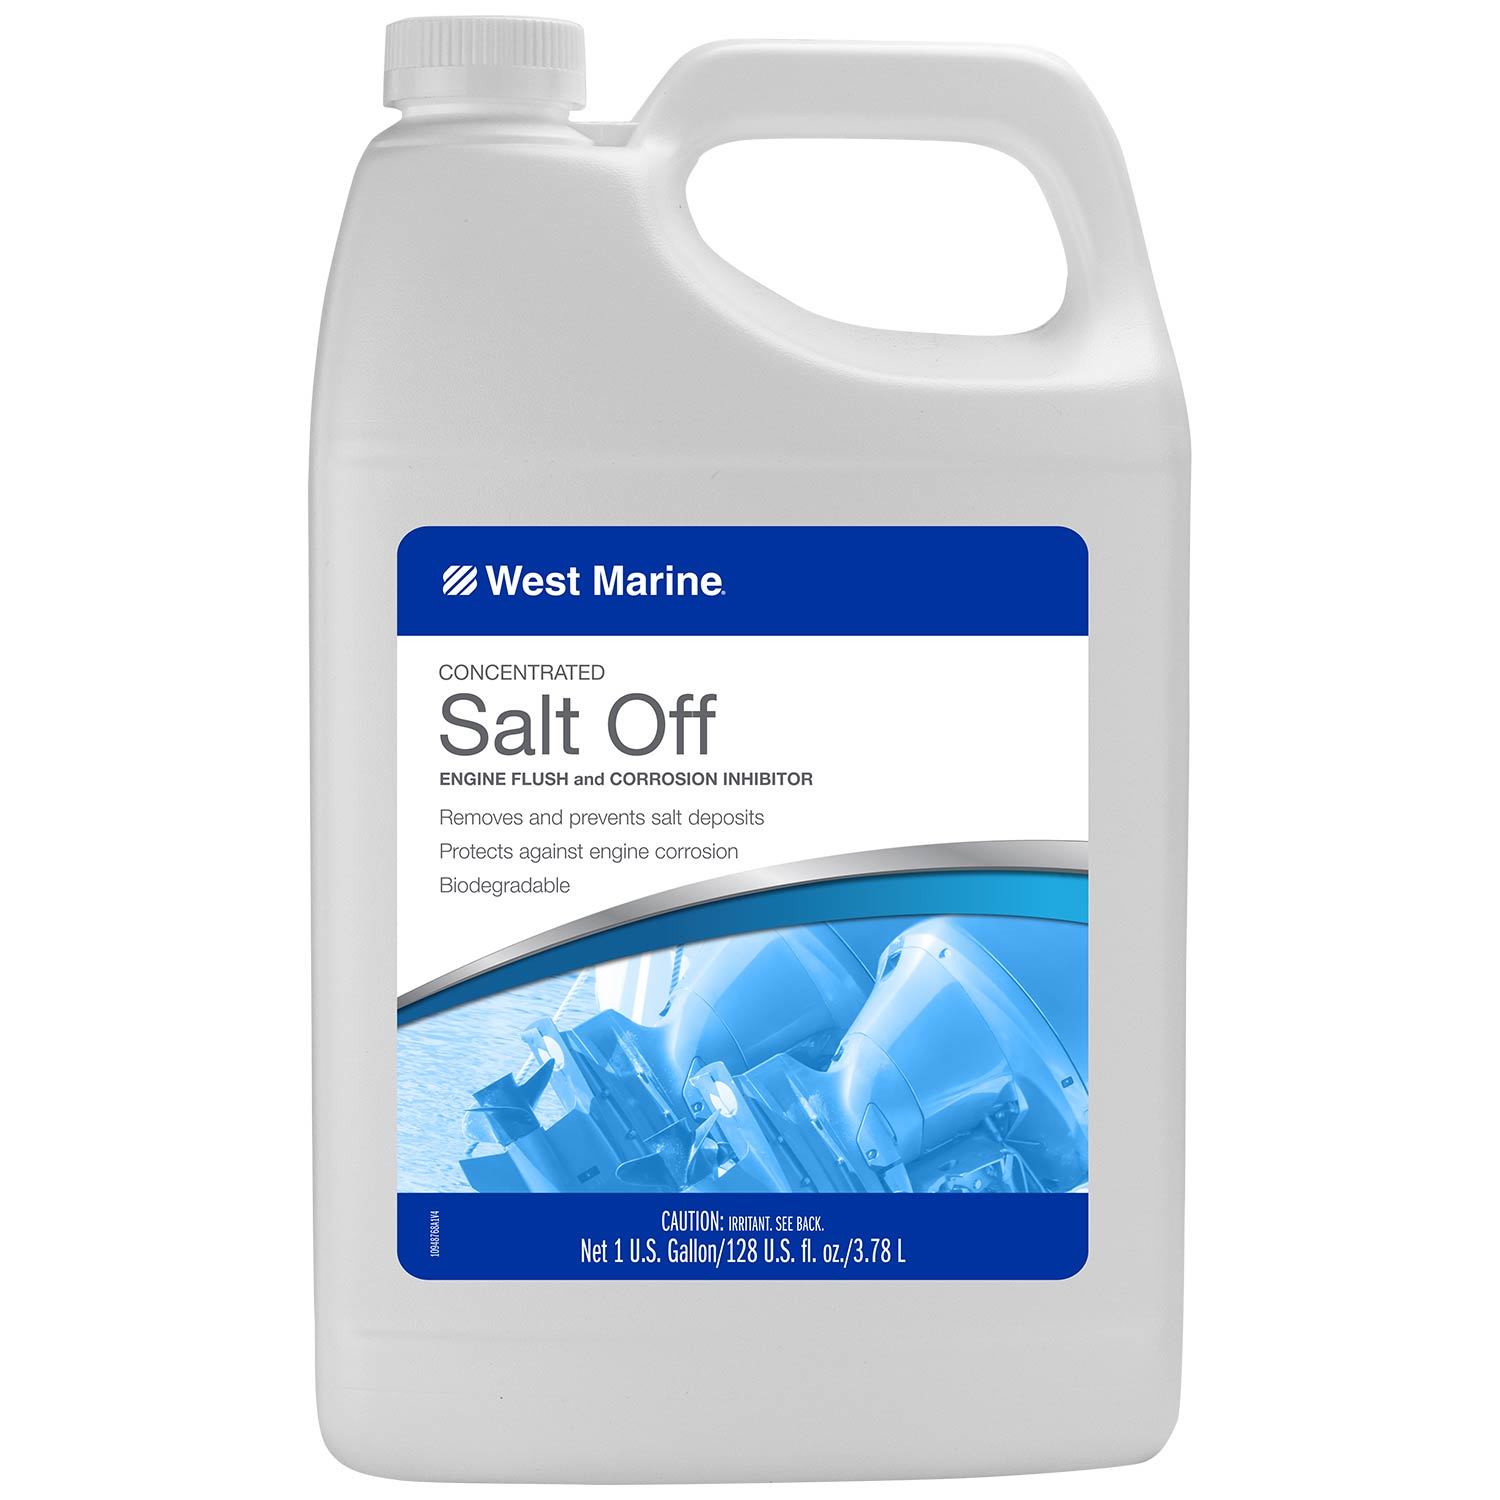 Salt-Away Salt Remover Spray 32oz Concentrate with Mixing Unit